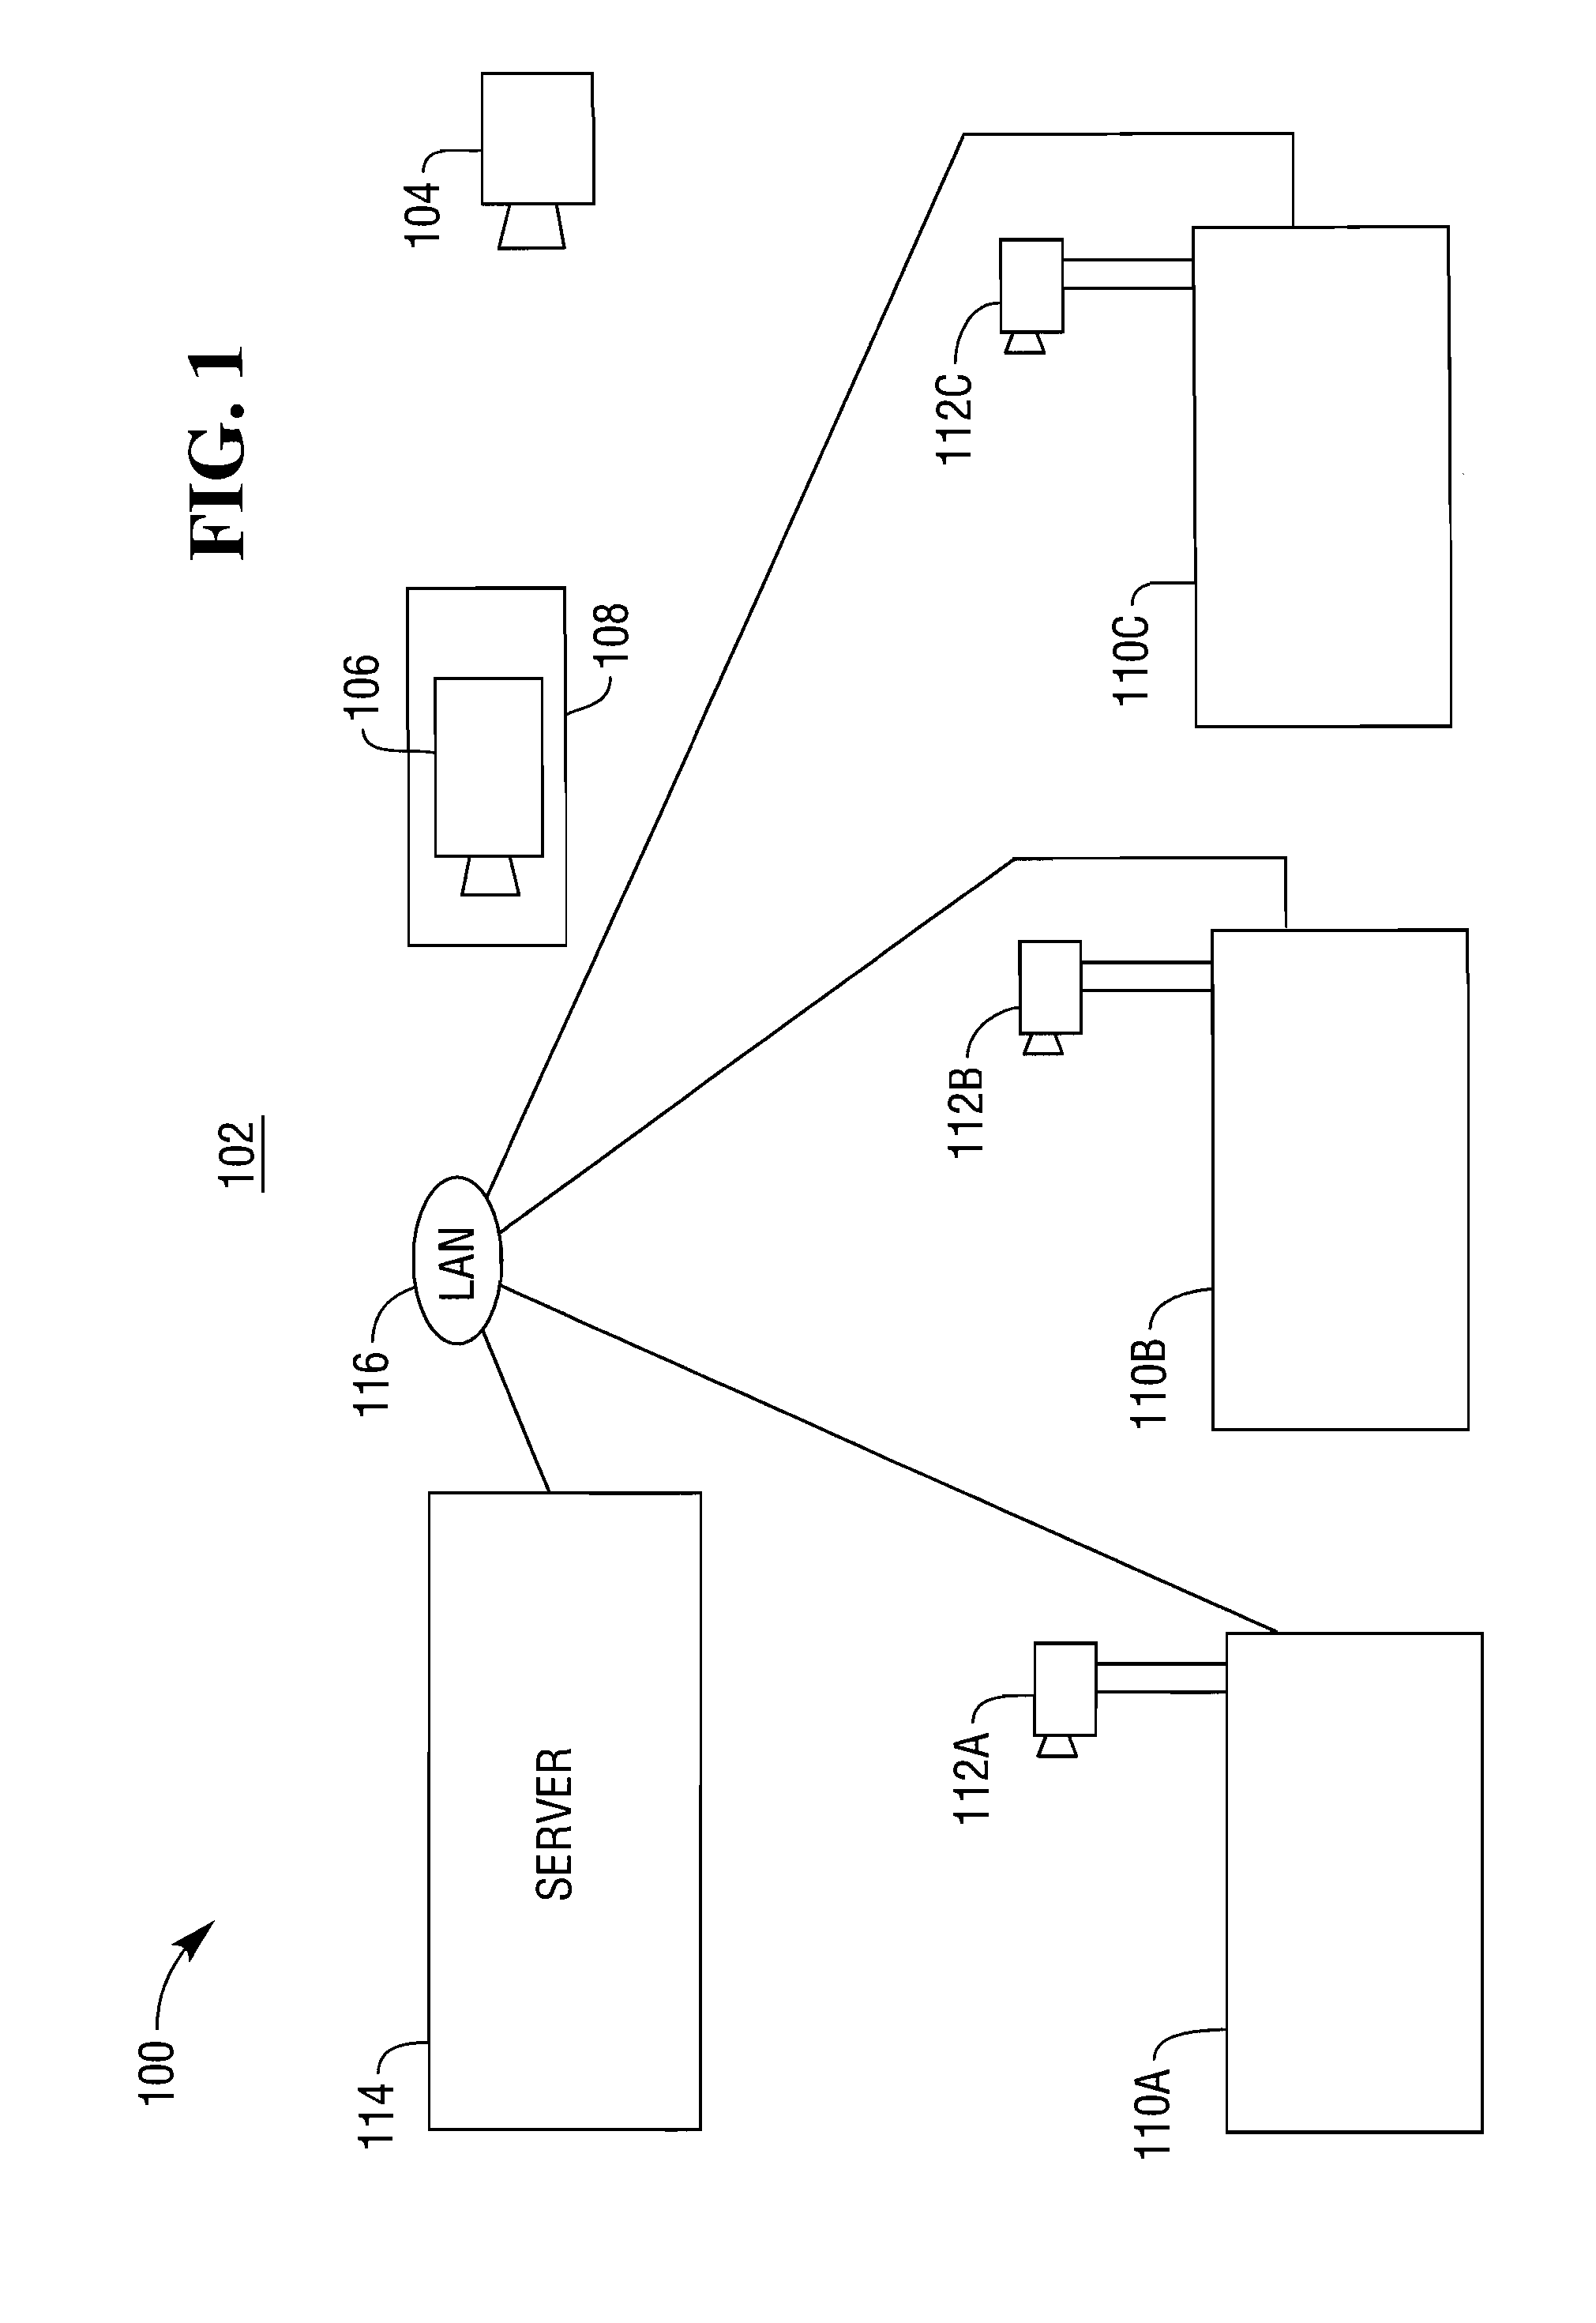 Methods and Apparatus for Improved Image Processing to Provide Retroactive Image Focusing and Improved Depth of Field in Retail Imaging Systems